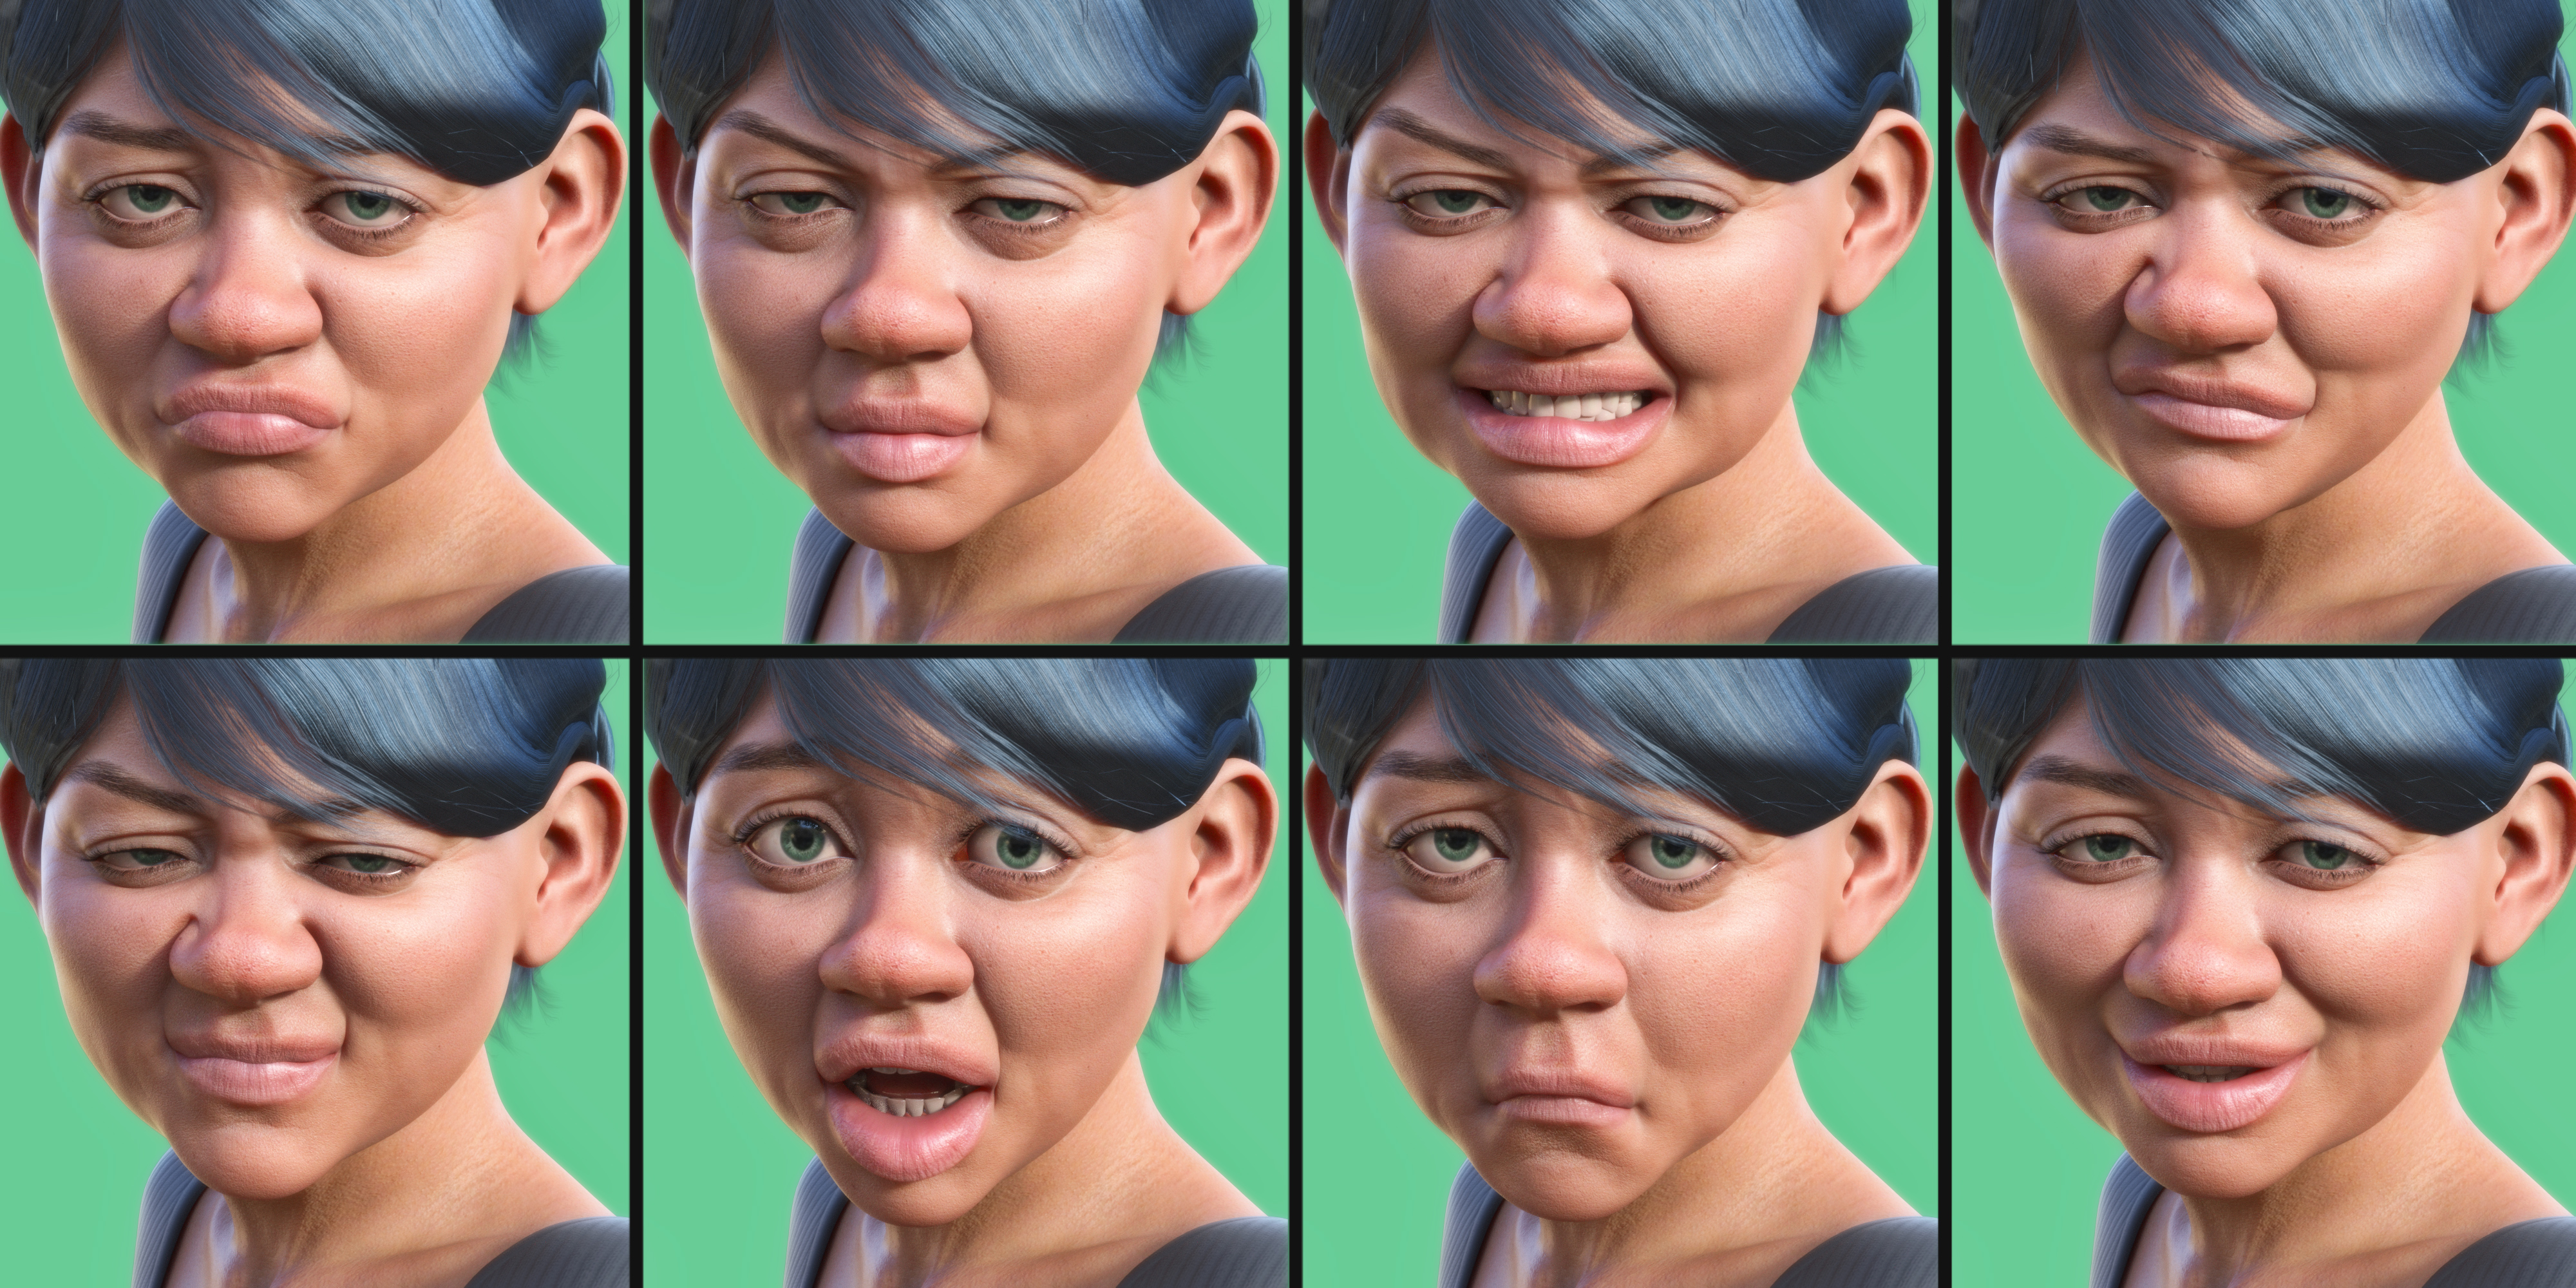 Topsy Expressive by: Neikdian, 3D Models by Daz 3D